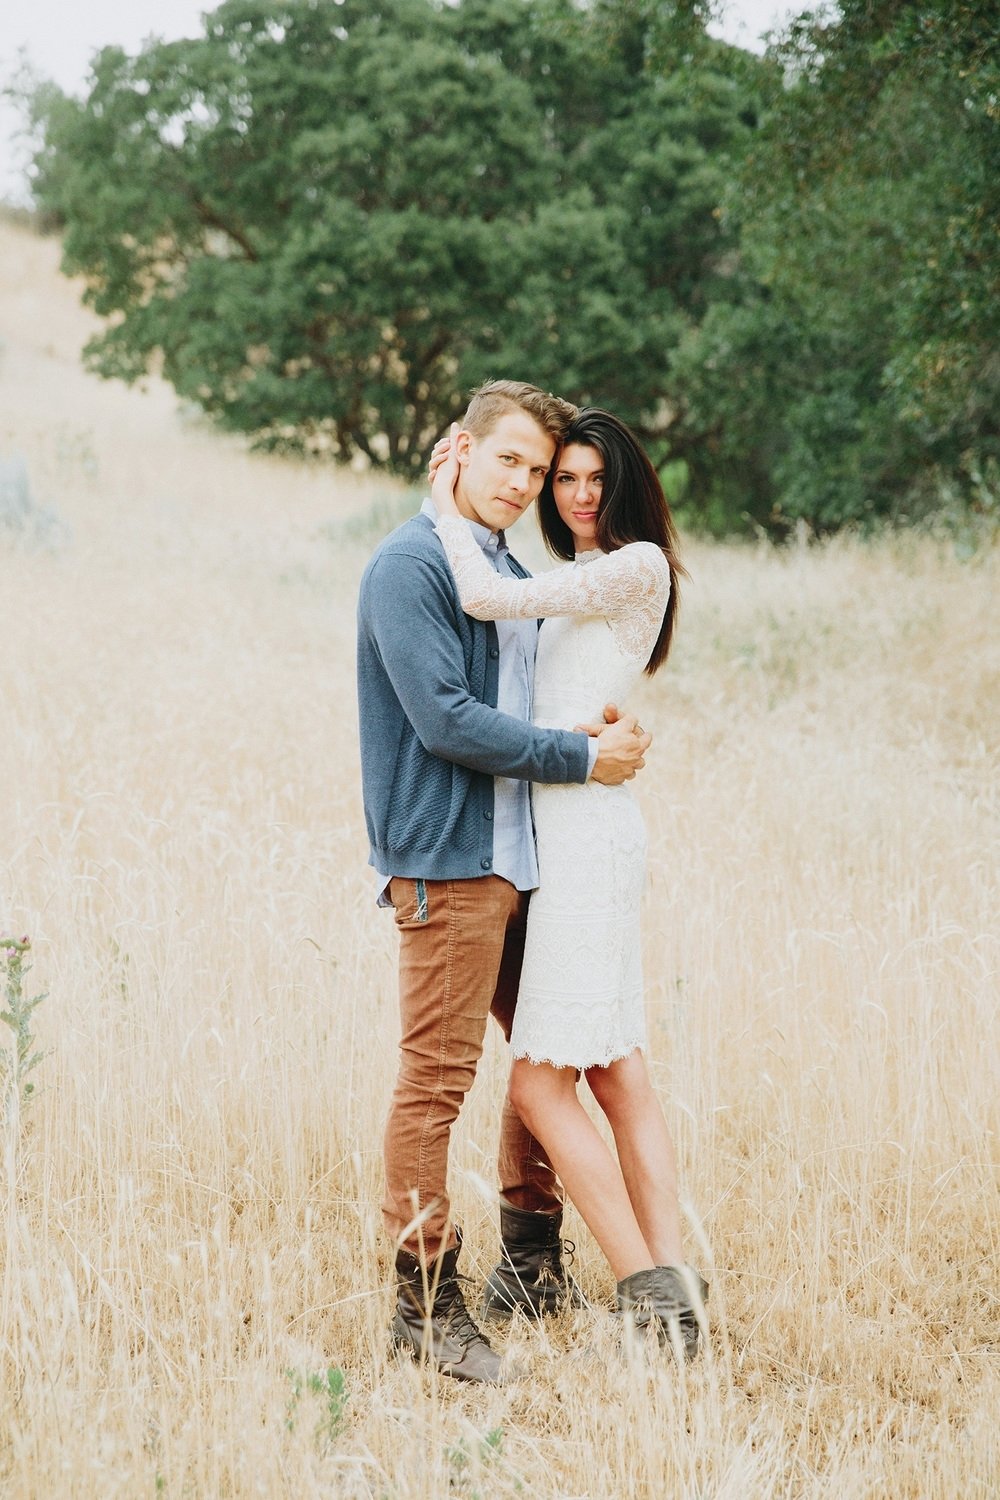 10 Attractive Engagement Picture Ideas For Summer cute engagement photo summer ideas cute engagement photo ideas 2022